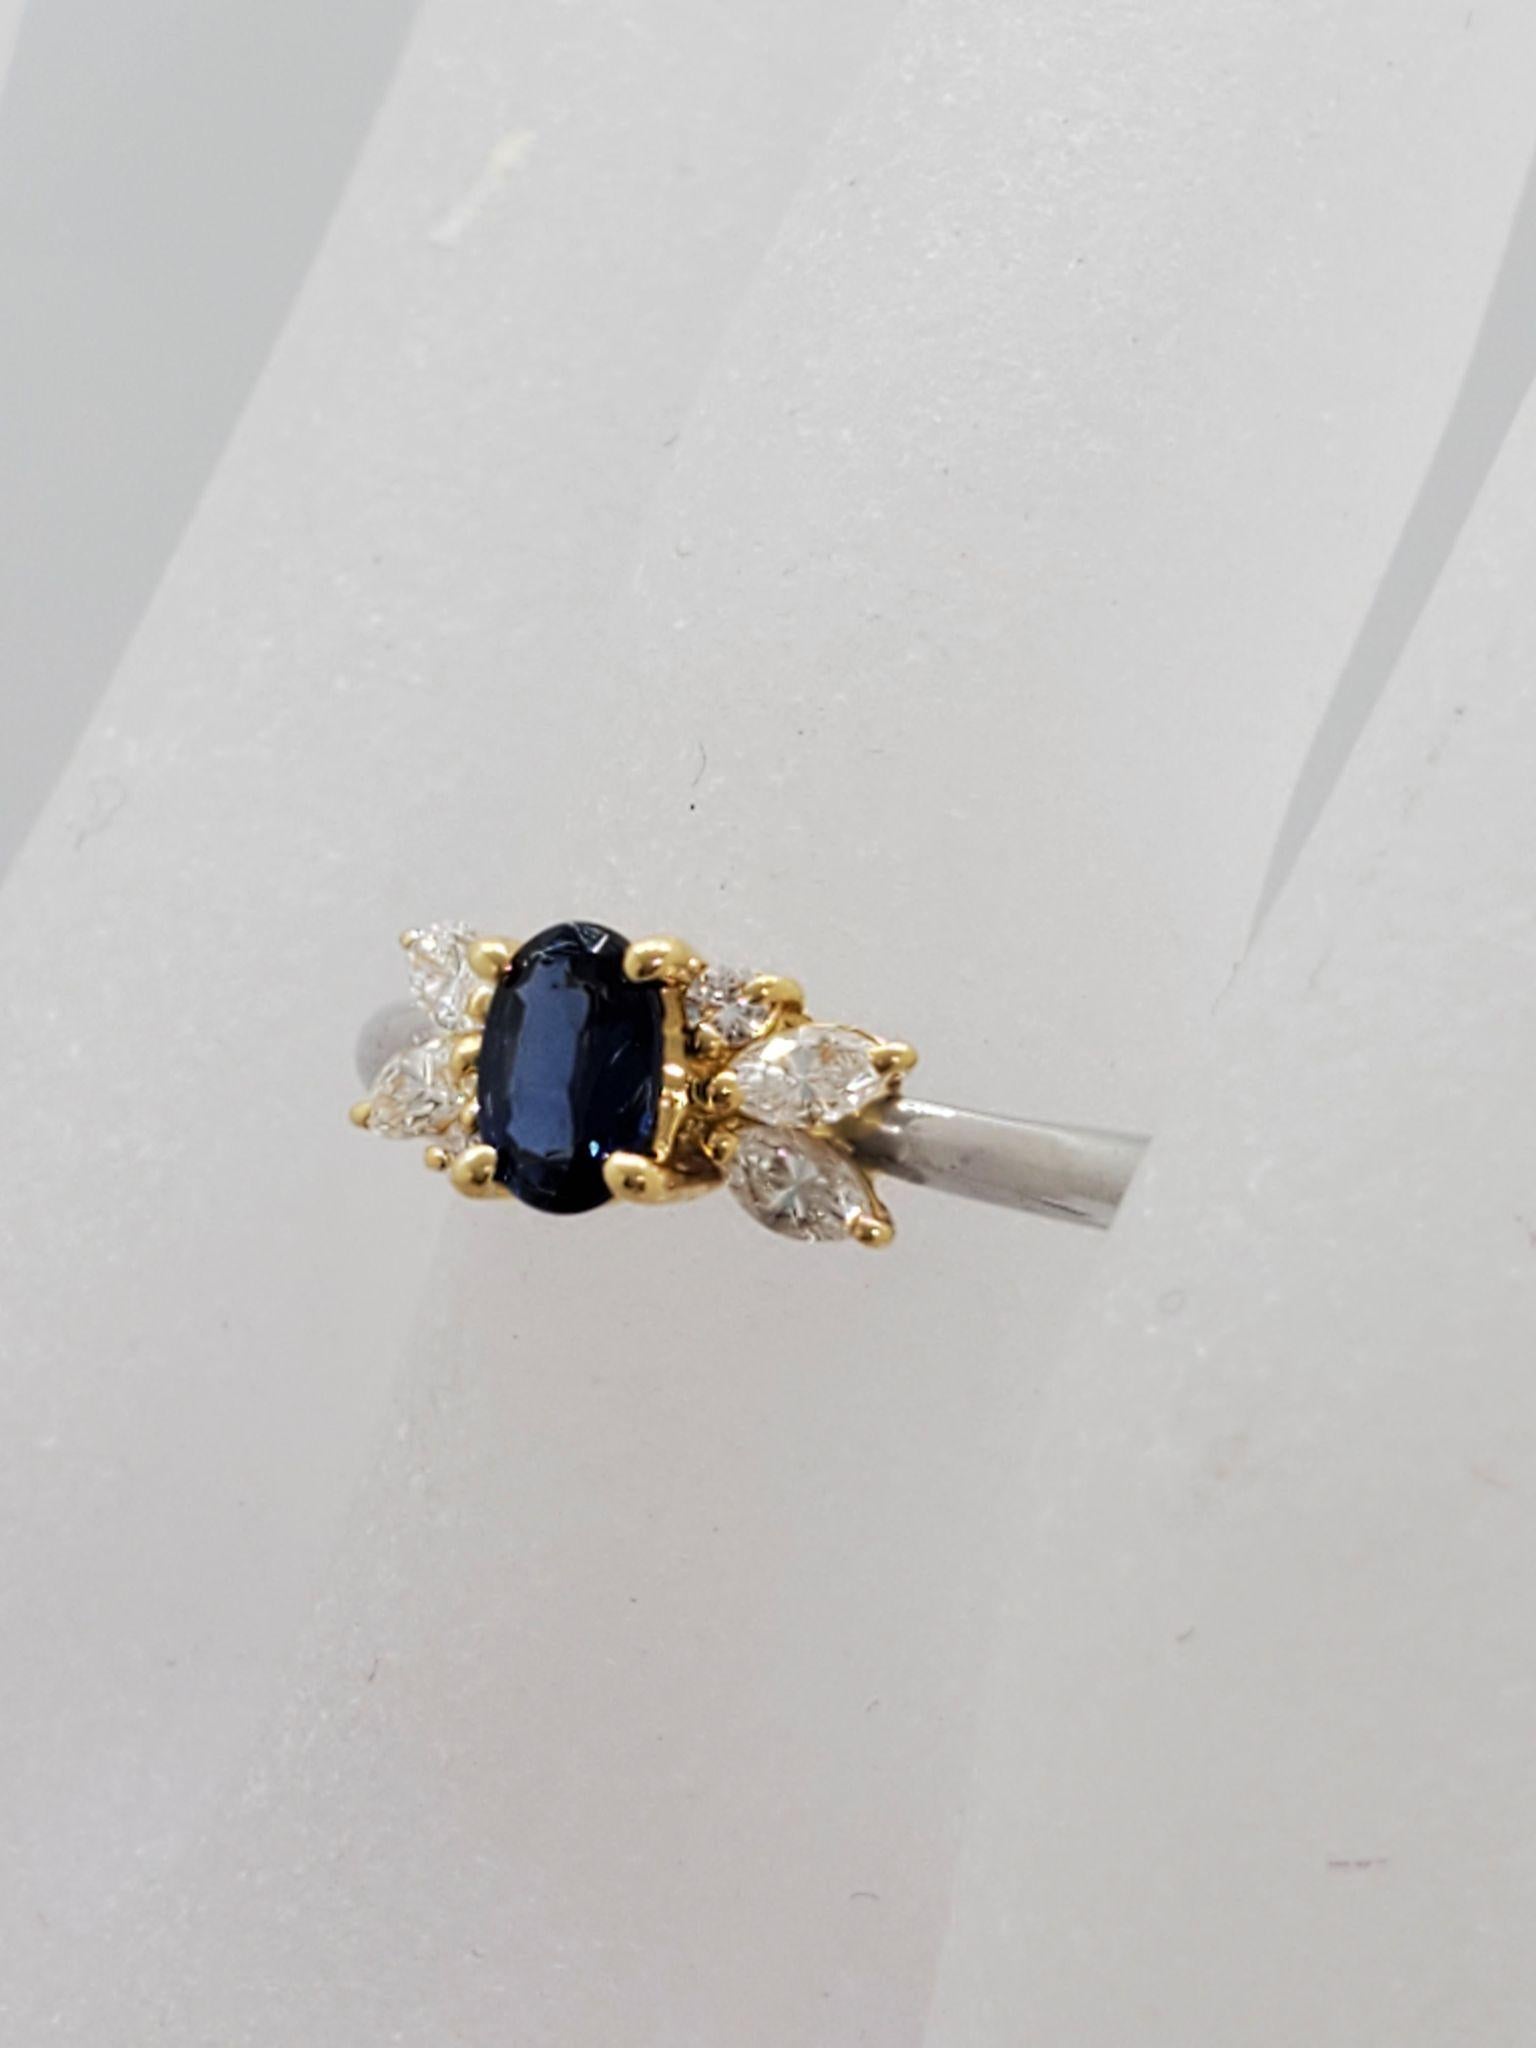  0.47ct Sapphire Oval & 0.27ctw Diamond Marquise & Round Platinum & 18K 2 Tone Gold Ring Approx.Wt. Size 5.25
